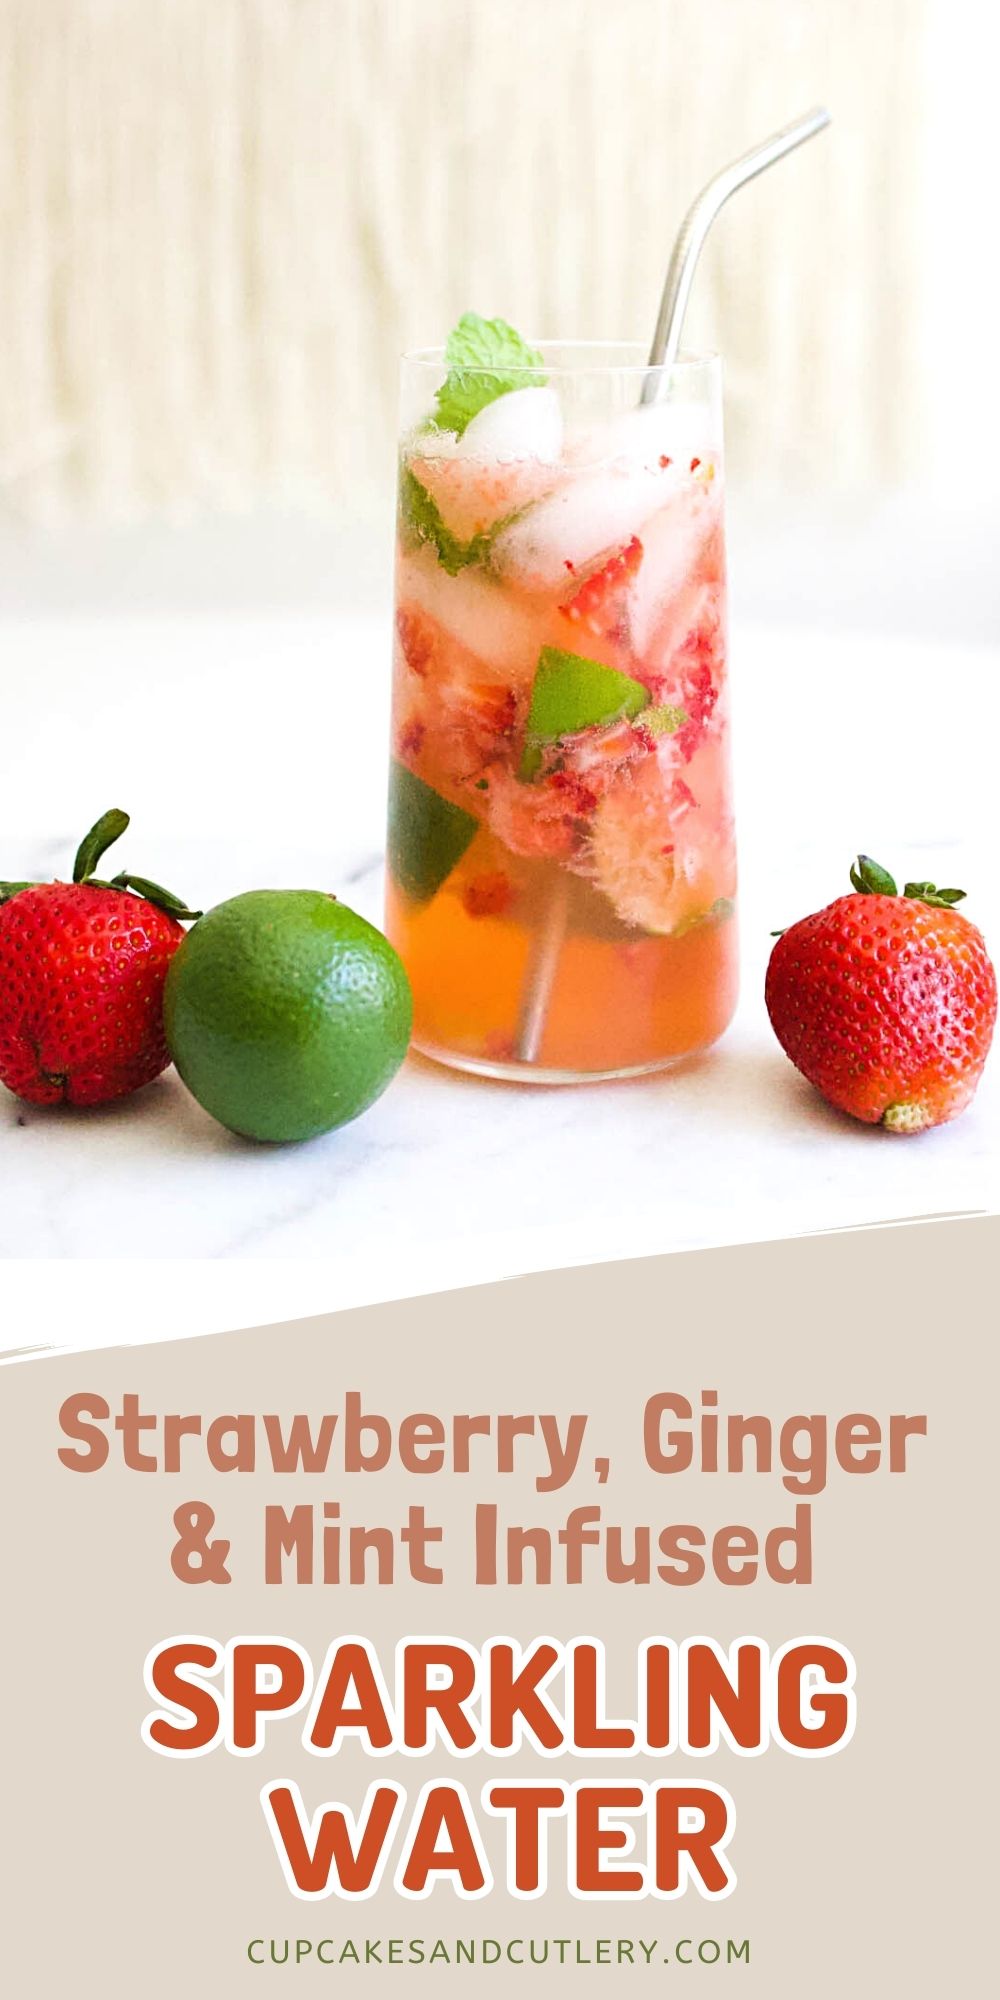 Text: Strawberry, Ginger and Mint Infused Sparkling Water with a glass holding an infused water next to a lime and 2 strawberries.